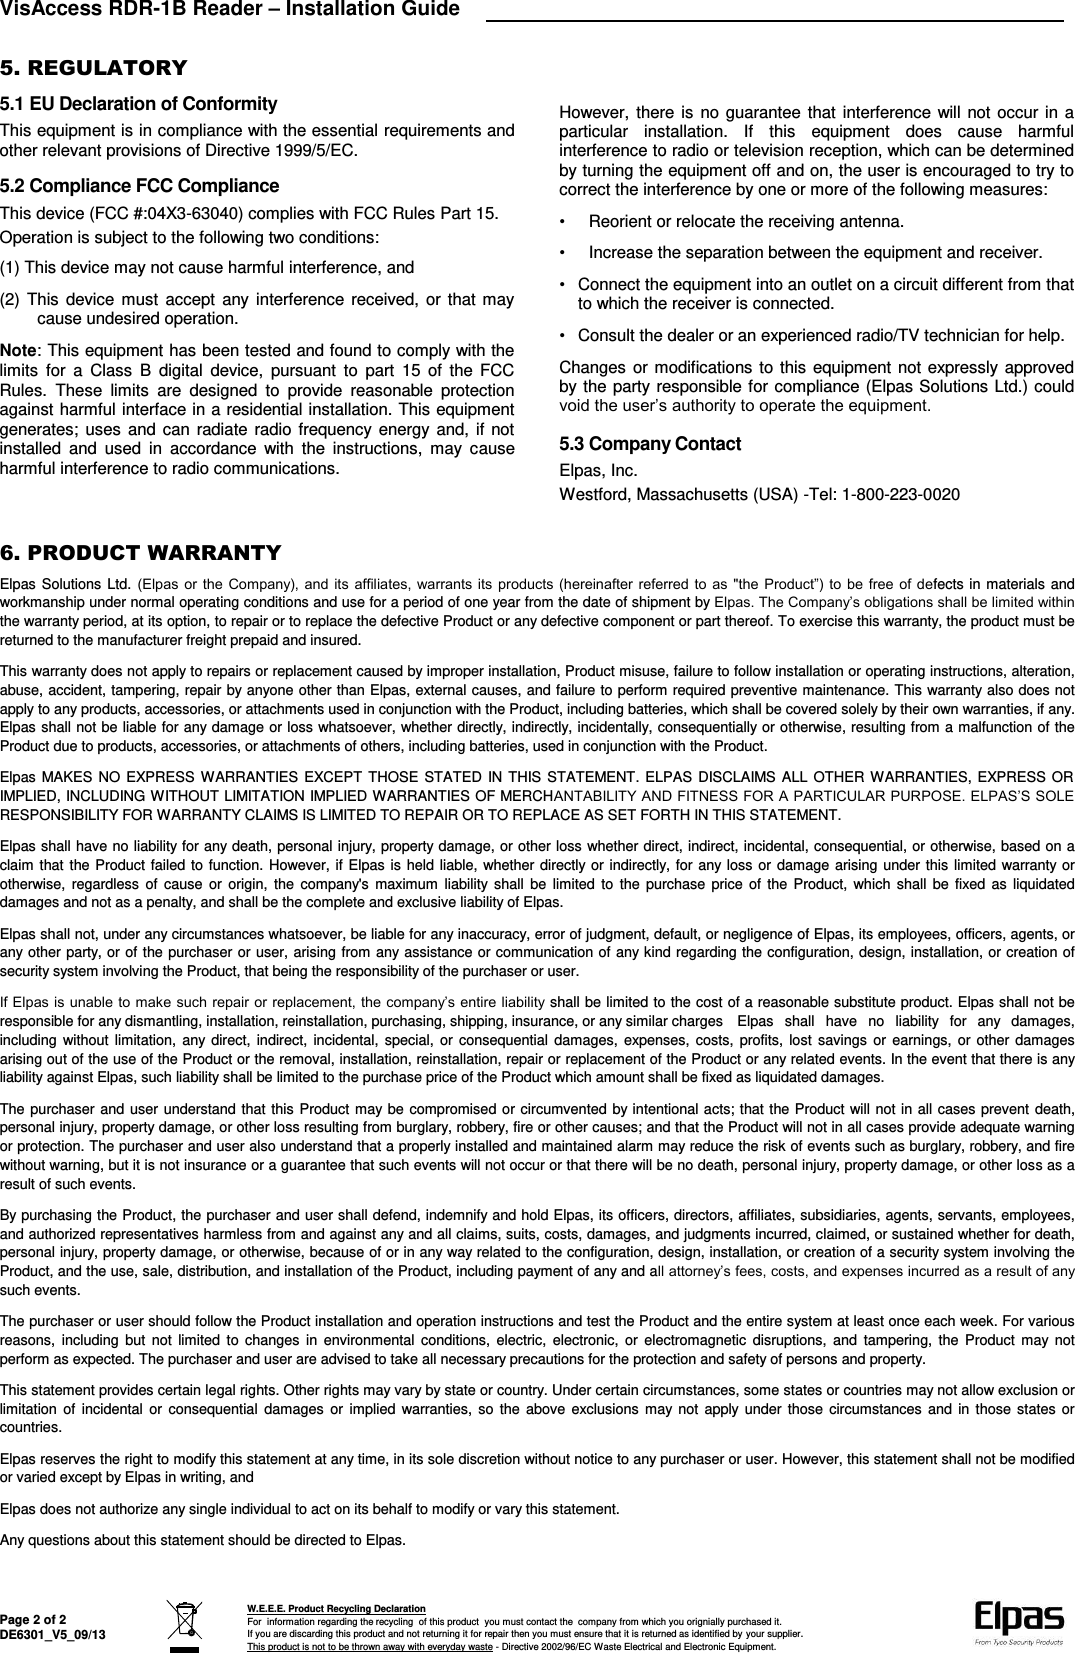 VisAccess RDR-1B Reader – Installation Guide   Page 2 of 2 DE6301_V5_09/13  W.E.E.E. Product Recycling Declaration For  information regarding the recycling  of this product  you must contact the  company from which you orignially purchased it. If you are discarding this product and not returning it for repair then you must ensure that it is returned as identified by your supplier. This product is not to be thrown away with everyday waste - Directive 2002/96/EC Waste Electrical and Electronic Equipment.    5. REGULATORY 5.1 EU Declaration of Conformity This equipment is in compliance with the essential requirements and other relevant provisions of Directive 1999/5/EC. 5.2 Compliance FCC Compliance This device (FCC #:04X3-63040) complies with FCC Rules Part 15. Operation is subject to the following two conditions: (1) This device may not cause harmful interference, and (2) This  device  must  accept any interference received, or that may cause undesired operation. Note: This equipment has been tested and found to comply with the limits  for  a  Class  B  digital  device,  pursuant  to  part  15  of  the  FCC Rules.  These  limits  are  designed  to  provide  reasonable  protection against harmful interface in a residential installation. This equipment generates; uses  and  can  radiate radio frequency energy and, if not installed  and  used  in  accordance  with  the  instructions,  may  cause harmful interference to radio communications. However, there is no guarantee that interference will not occur in a particular  installation.  If  this  equipment  does  cause  harmful interference to radio or television reception, which can be determined by turning the equipment off and on, the user is encouraged to try to correct the interference by one or more of the following measures: •  Reorient or relocate the receiving antenna. •  Increase the separation between the equipment and receiver. •  Connect the equipment into an outlet on a circuit different from that to which the receiver is connected. •  Consult the dealer or an experienced radio/TV technician for help. Changes or modifications to this equipment not expressly approved by the party responsible for compliance (Elpas Solutions Ltd.) could void the user’s authority to operate the equipment. 5.3 Company Contact Elpas, Inc. Westford, Massachusetts (USA) -Tel: 1-800-223-0020  6. PRODUCT WARRANTY  Elpas Solutions Ltd. (Elpas  or  the  Company),  and its  affiliates,  warrants its  products  (hereinafter referred to  as  &quot;the  Product”) to  be  free  of  defects in materials and workmanship under normal operating conditions and use for a period of one year from the date of shipment by Elpas. The Company’s obligations shall be limited within the warranty period, at its option, to repair or to replace the defective Product or any defective component or part thereof. To exercise this warranty, the product must be returned to the manufacturer freight prepaid and insured. This warranty does not apply to repairs or replacement caused by improper installation, Product misuse, failure to follow installation or operating instructions, alteration, abuse, accident, tampering, repair by anyone other than Elpas, external causes, and failure to perform required preventive maintenance. This warranty also does not apply to any products, accessories, or attachments used in conjunction with the Product, including batteries, which shall be covered solely by their own warranties, if any. Elpas shall not be liable for any damage or loss whatsoever, whether directly, indirectly, incidentally, consequentially or otherwise, resulting from a malfunction of the Product due to products, accessories, or attachments of others, including batteries, used in conjunction with the Product. Elpas MAKES NO  EXPRESS WARRANTIES EXCEPT THOSE  STATED IN THIS STATEMENT. ELPAS  DISCLAIMS ALL OTHER WARRANTIES, EXPRESS OR IMPLIED, INCLUDING WITHOUT LIMITATION IMPLIED WARRANTIES OF MERCHANTABILITY AND FITNESS FOR A PARTICULAR PURPOSE. ELPAS’S SOLE RESPONSIBILITY FOR WARRANTY CLAIMS IS LIMITED TO REPAIR OR TO REPLACE AS SET FORTH IN THIS STATEMENT. Elpas shall have no liability for any death, personal injury, property damage, or other loss whether direct, indirect, incidental, consequential, or otherwise, based on a claim that the Product failed to function. However, if Elpas is held liable, whether directly or indirectly, for any loss or damage arising under this limited warranty or otherwise,  regardless  of  cause  or  origin,  the  company&apos;s maximum  liability shall  be  limited  to  the  purchase price of  the  Product, which  shall  be fixed  as liquidated damages and not as a penalty, and shall be the complete and exclusive liability of Elpas. Elpas shall not, under any circumstances whatsoever, be liable for any inaccuracy, error of judgment, default, or negligence of Elpas, its employees, officers, agents, or any other party, or of the purchaser or user, arising from any assistance or communication of any kind regarding the configuration, design, installation, or creation of security system involving the Product, that being the responsibility of the purchaser or user. If Elpas is unable to make such repair or replacement, the company’s entire liability shall be limited to the cost of a reasonable substitute product. Elpas shall not be responsible for any dismantling, installation, reinstallation, purchasing, shipping, insurance, or any similar charges  Elpas  shall  have  no  liability  for  any  damages, including without limitation, any direct, indirect,  incidental, special,  or consequential damages,  expenses, costs, profits,  lost  savings or  earnings, or other damages arising out of the use of the Product or the removal, installation, reinstallation, repair or replacement of the Product or any related events. In the event that there is any liability against Elpas, such liability shall be limited to the purchase price of the Product which amount shall be fixed as liquidated damages. The purchaser and user understand that this Product may be compromised or circumvented by intentional acts; that the Product will not in all cases prevent death, personal injury, property damage, or other loss resulting from burglary, robbery, fire or other causes; and that the Product will not in all cases provide adequate warning or protection. The purchaser and user also understand that a properly installed and maintained alarm may reduce the risk of events such as burglary, robbery, and fire without warning, but it is not insurance or a guarantee that such events will not occur or that there will be no death, personal injury, property damage, or other loss as a result of such events. By purchasing the Product, the purchaser and user shall defend, indemnify and hold Elpas, its officers, directors, affiliates, subsidiaries, agents, servants, employees, and authorized representatives harmless from and against any and all claims, suits, costs, damages, and judgments incurred, claimed, or sustained whether for death, personal injury, property damage, or otherwise, because of or in any way related to the configuration, design, installation, or creation of a security system involving the Product, and the use, sale, distribution, and installation of the Product, including payment of any and all attorney’s fees, costs, and expenses incurred as a result of any such events. The purchaser or user should follow the Product installation and operation instructions and test the Product and the entire system at least once each week. For various reasons,  including  but  not  limited  to  changes  in  environmental  conditions,  electric,  electronic,  or  electromagnetic  disruptions, and  tampering, the  Product  may  not perform as expected. The purchaser and user are advised to take all necessary precautions for the protection and safety of persons and property. This statement provides certain legal rights. Other rights may vary by state or country. Under certain circumstances, some states or countries may not allow exclusion or limitation  of  incidental  or  consequential  damages  or  implied  warranties, so the  above exclusions  may not apply under those  circumstances and  in  those states  or countries. Elpas reserves the right to modify this statement at any time, in its sole discretion without notice to any purchaser or user. However, this statement shall not be modified or varied except by Elpas in writing, and Elpas does not authorize any single individual to act on its behalf to modify or vary this statement. Any questions about this statement should be directed to Elpas.  